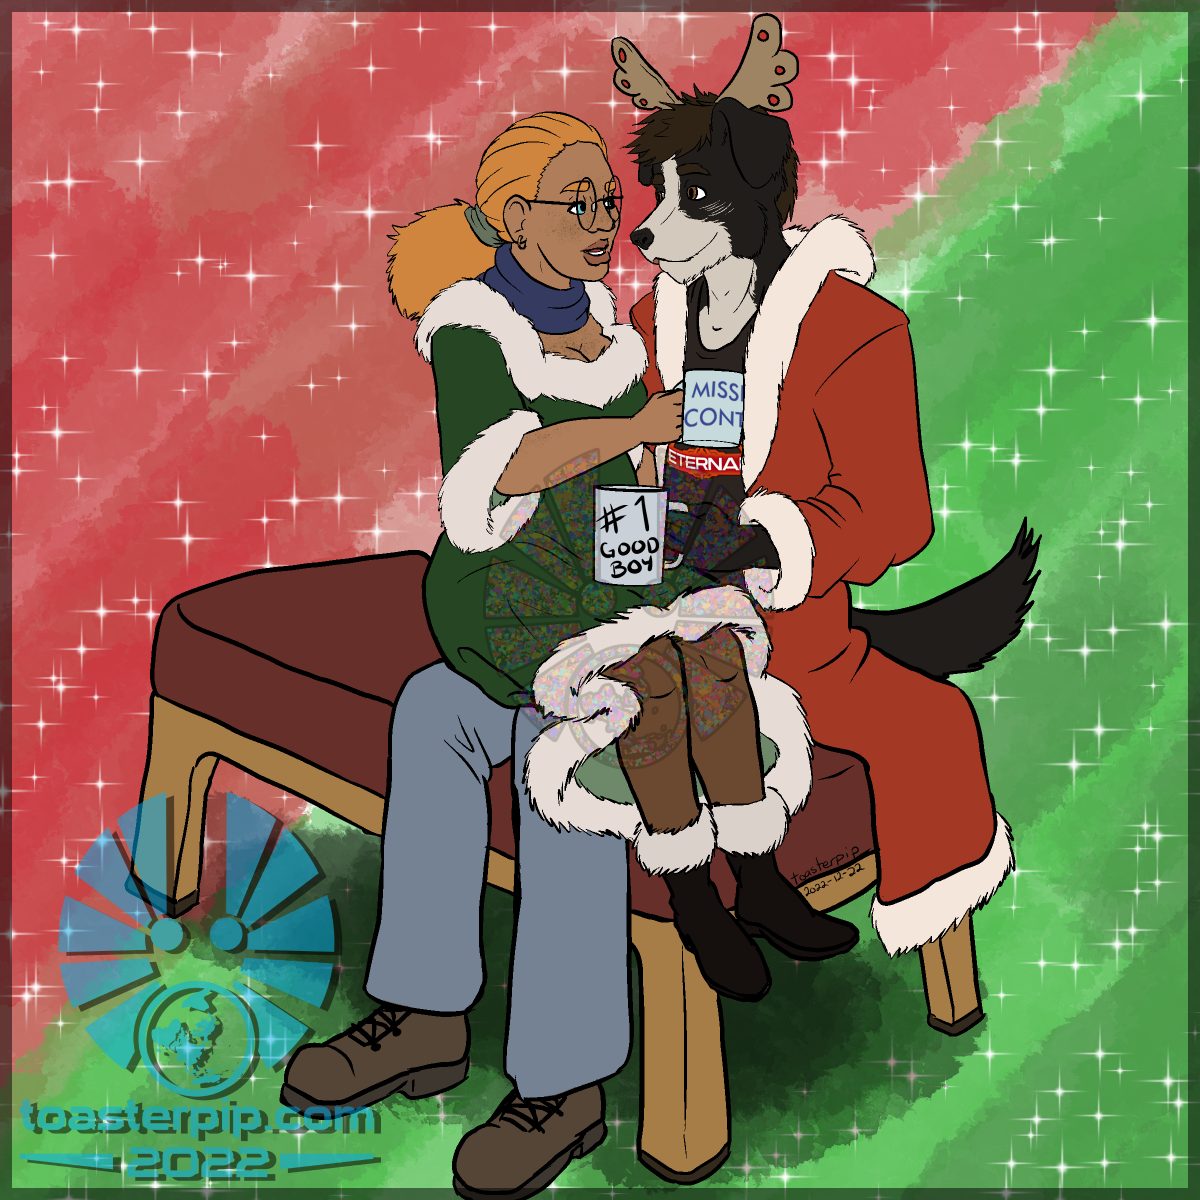 toasterpip A couple sitting on a bench. The man, a border collie anthro, is wearing a red fur-trimmed coat and a felt antler headband, and holds a mug that says "Number One Good Boy". In his lap sits a human woman in a green fur-trimmed holiday dress, holding a mug that reads "Mission Control". They're snuggled up and looking into each other's eyes, enjoying each other's company.